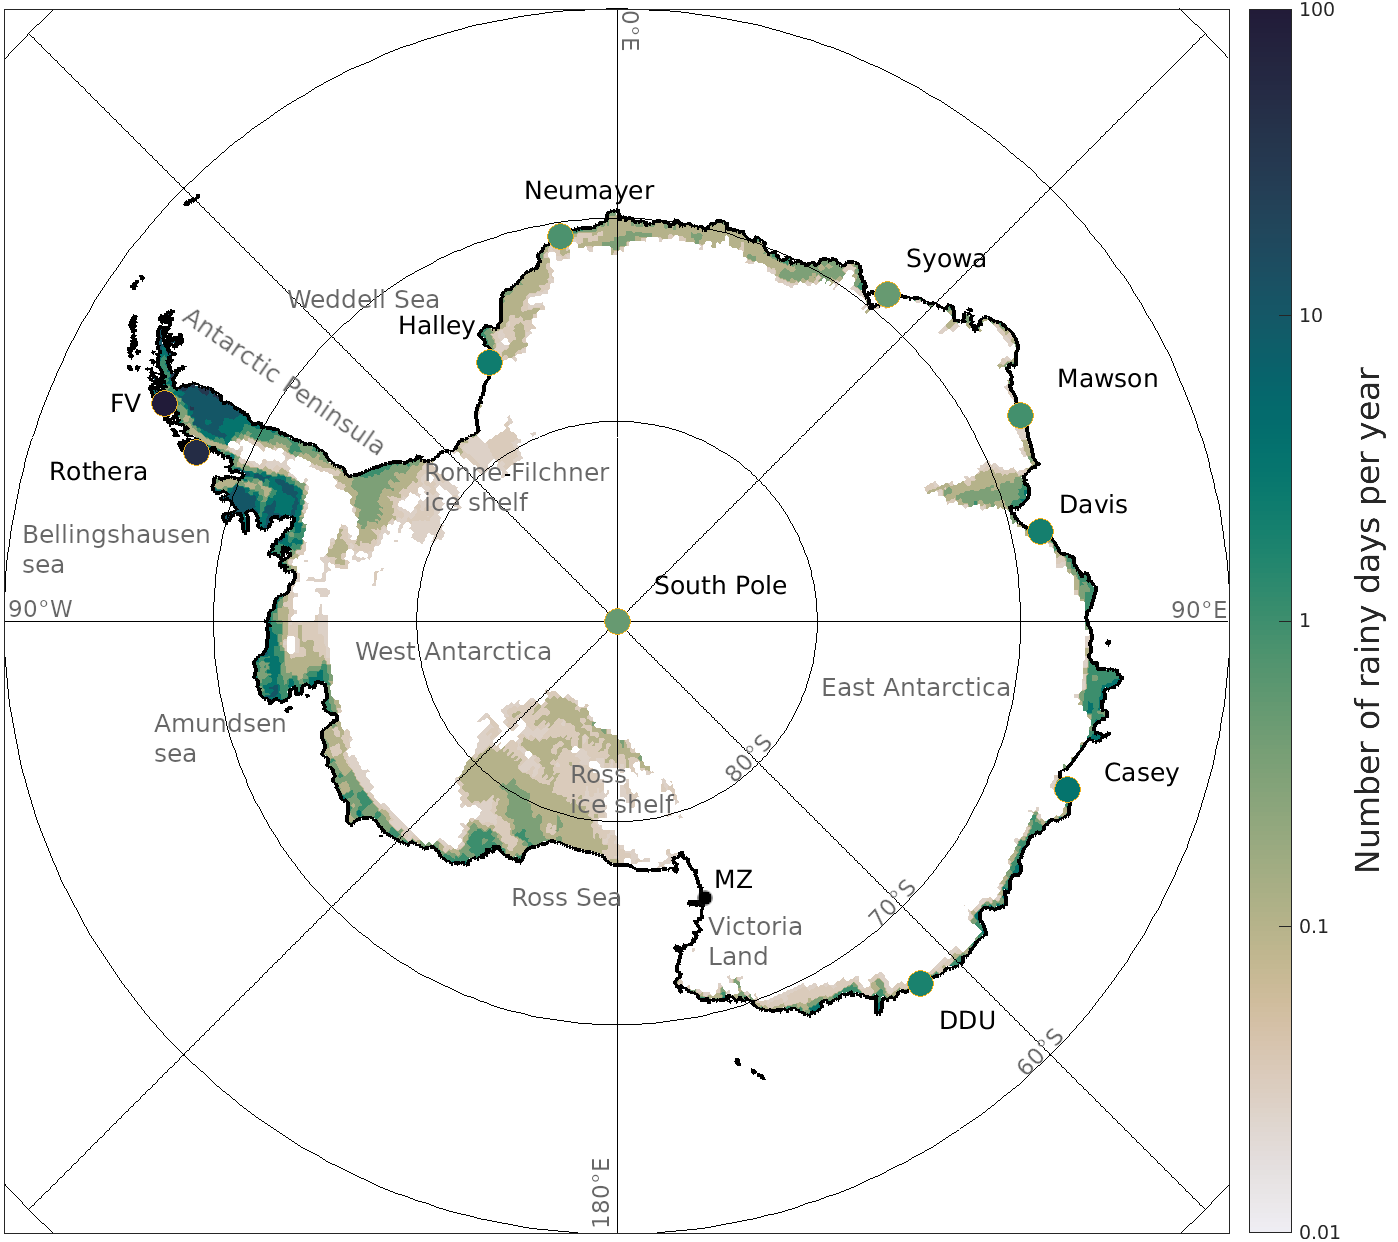 map of Antarctica with the mean annual rainy days from 1979-2017 depicted as color intensity.